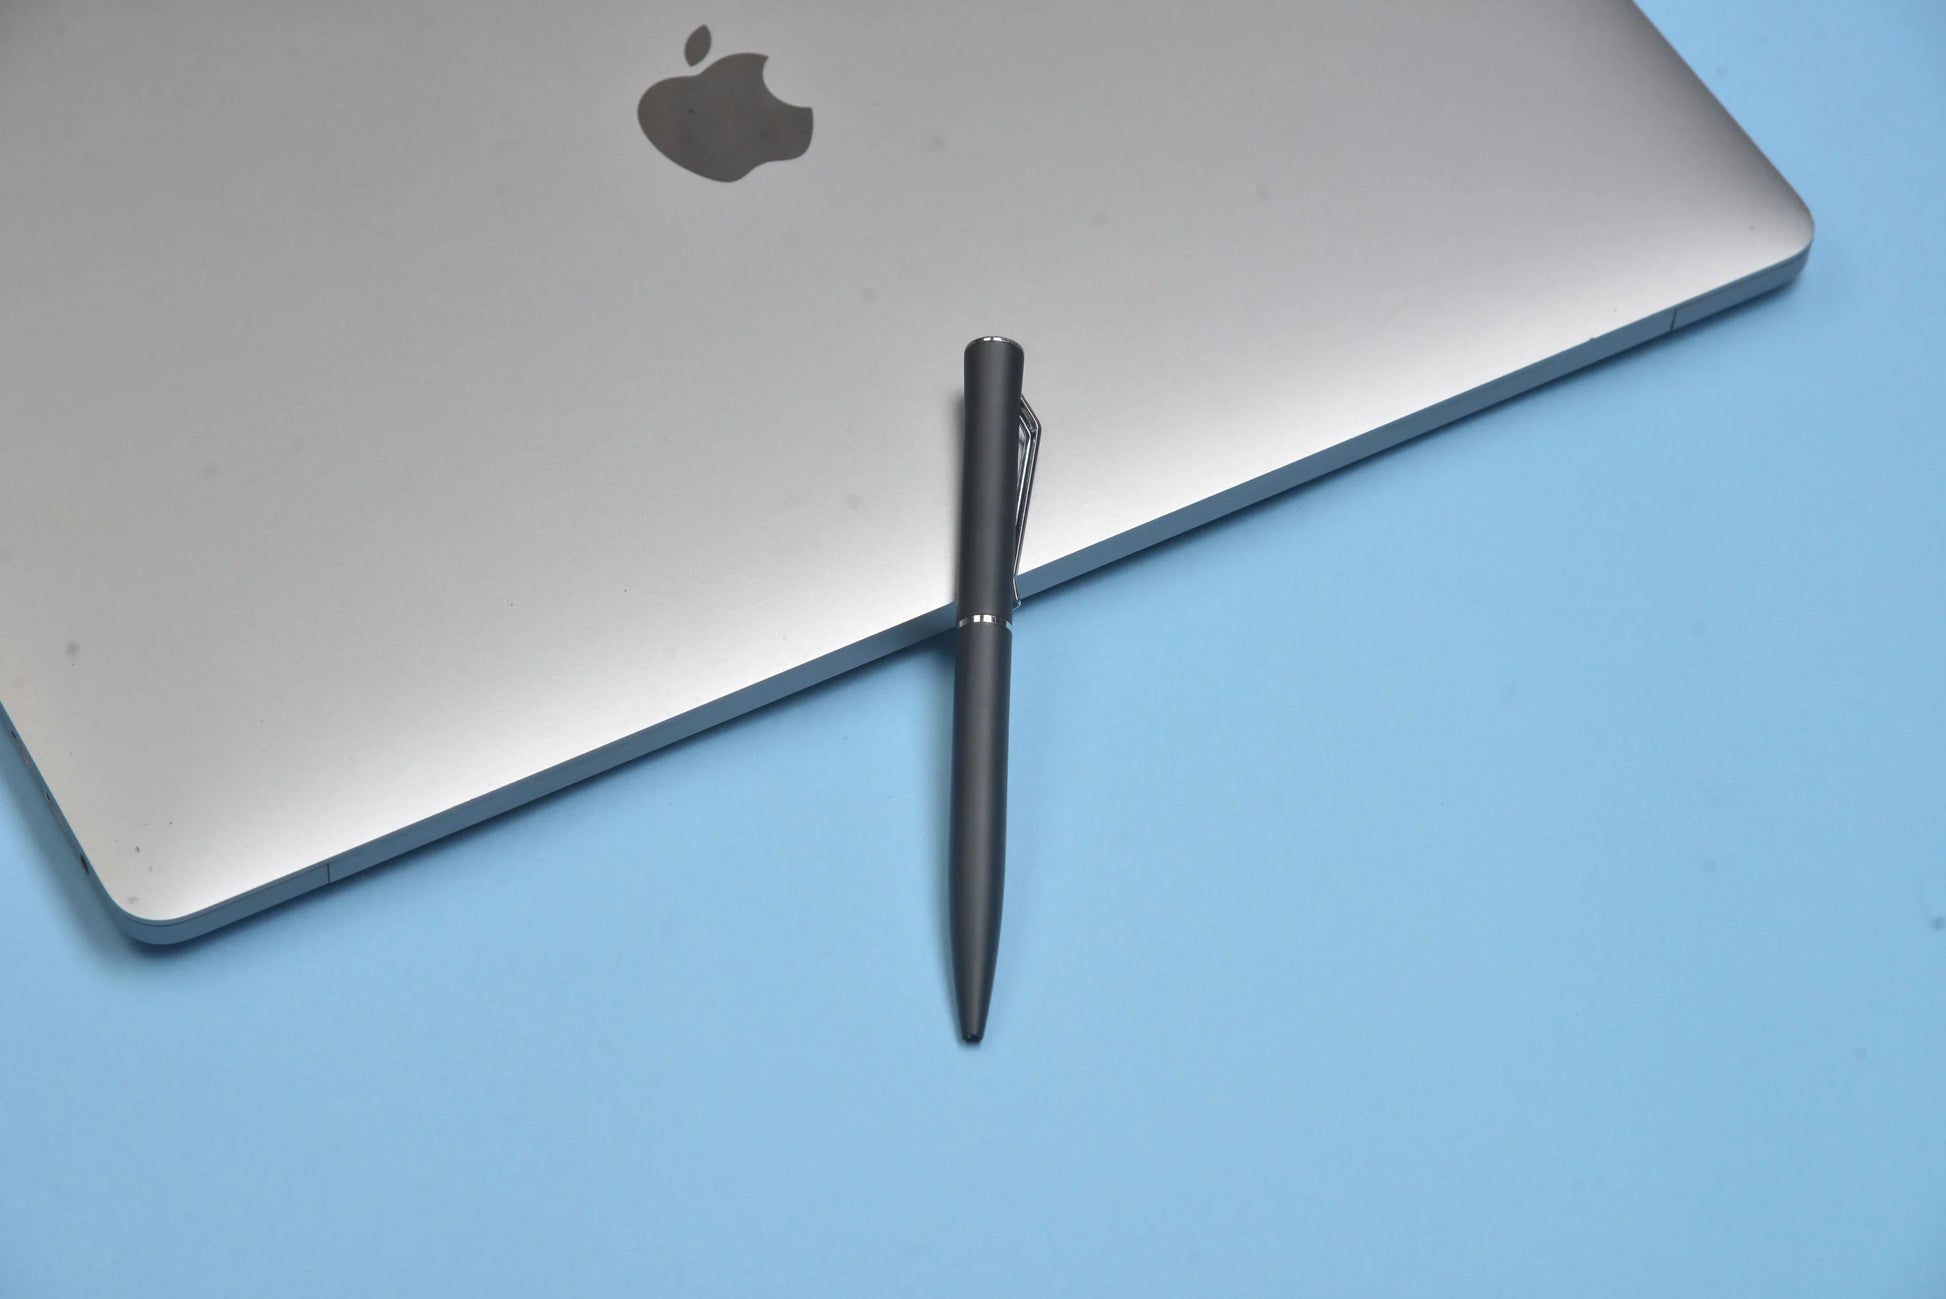 "Write with ease and comfort with our ergonomic and stylish pen. Perfect for daily use, note-taking, and signing important documents."